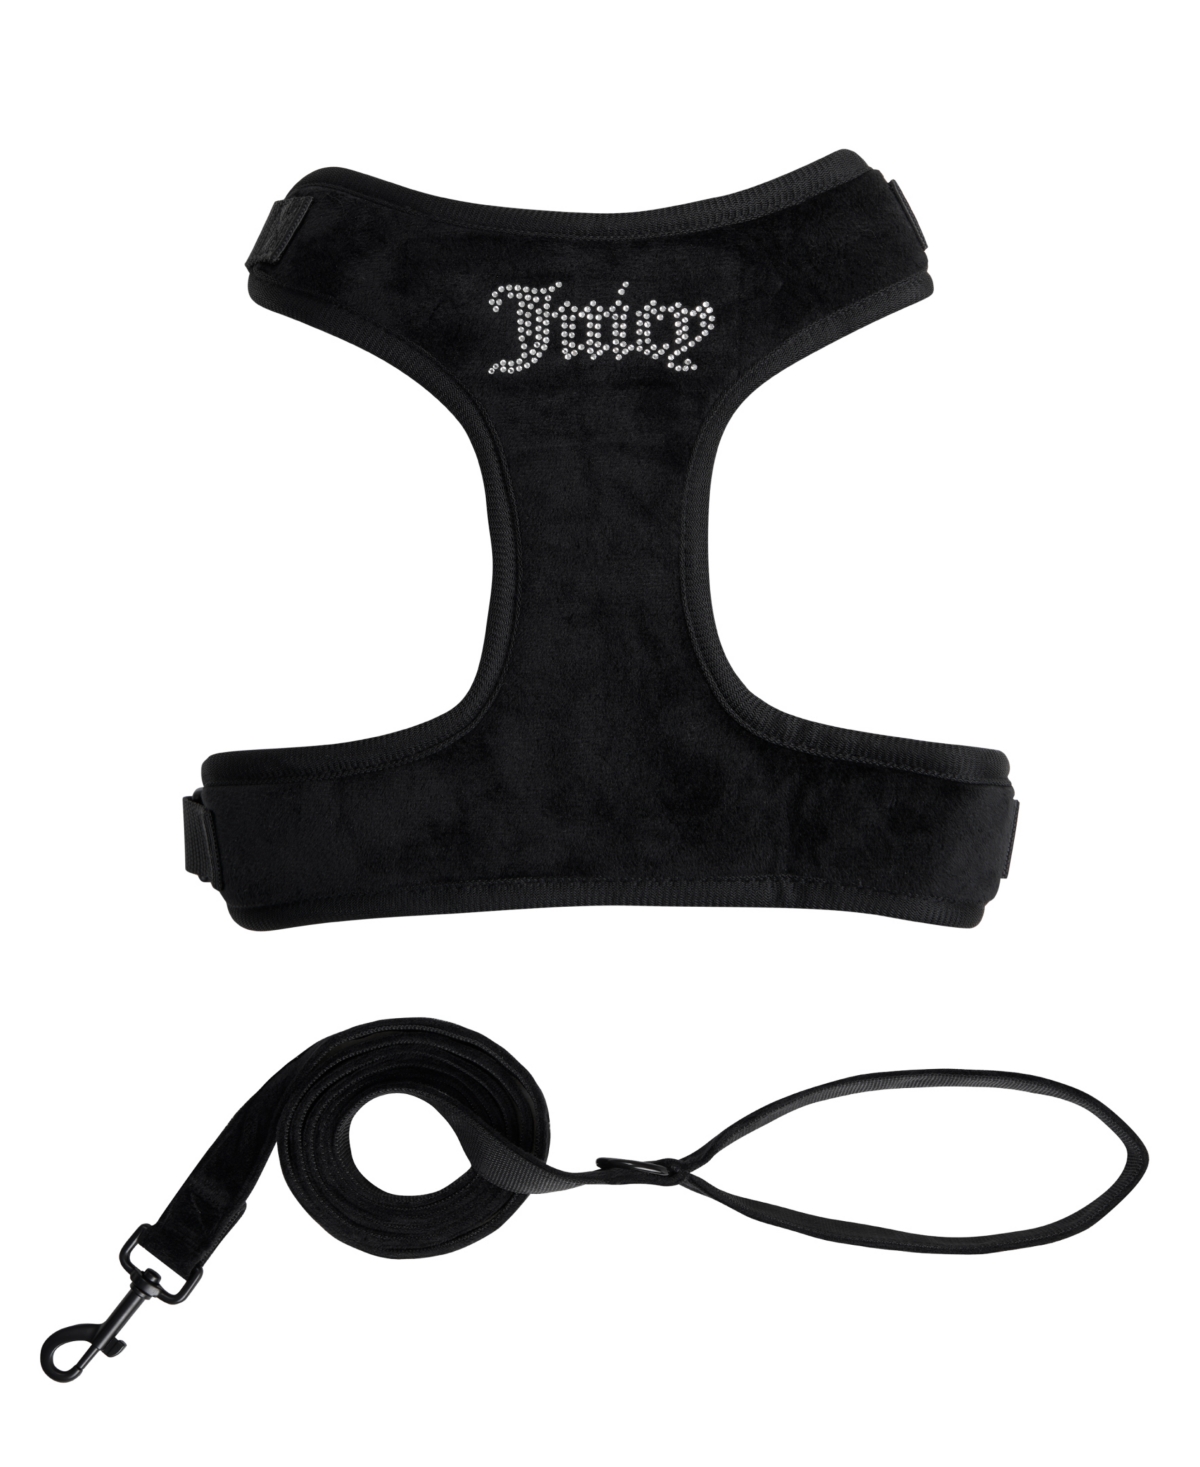 Bling Velour Pet Harness and Leash 2 Piece Set, Extra Small - Large